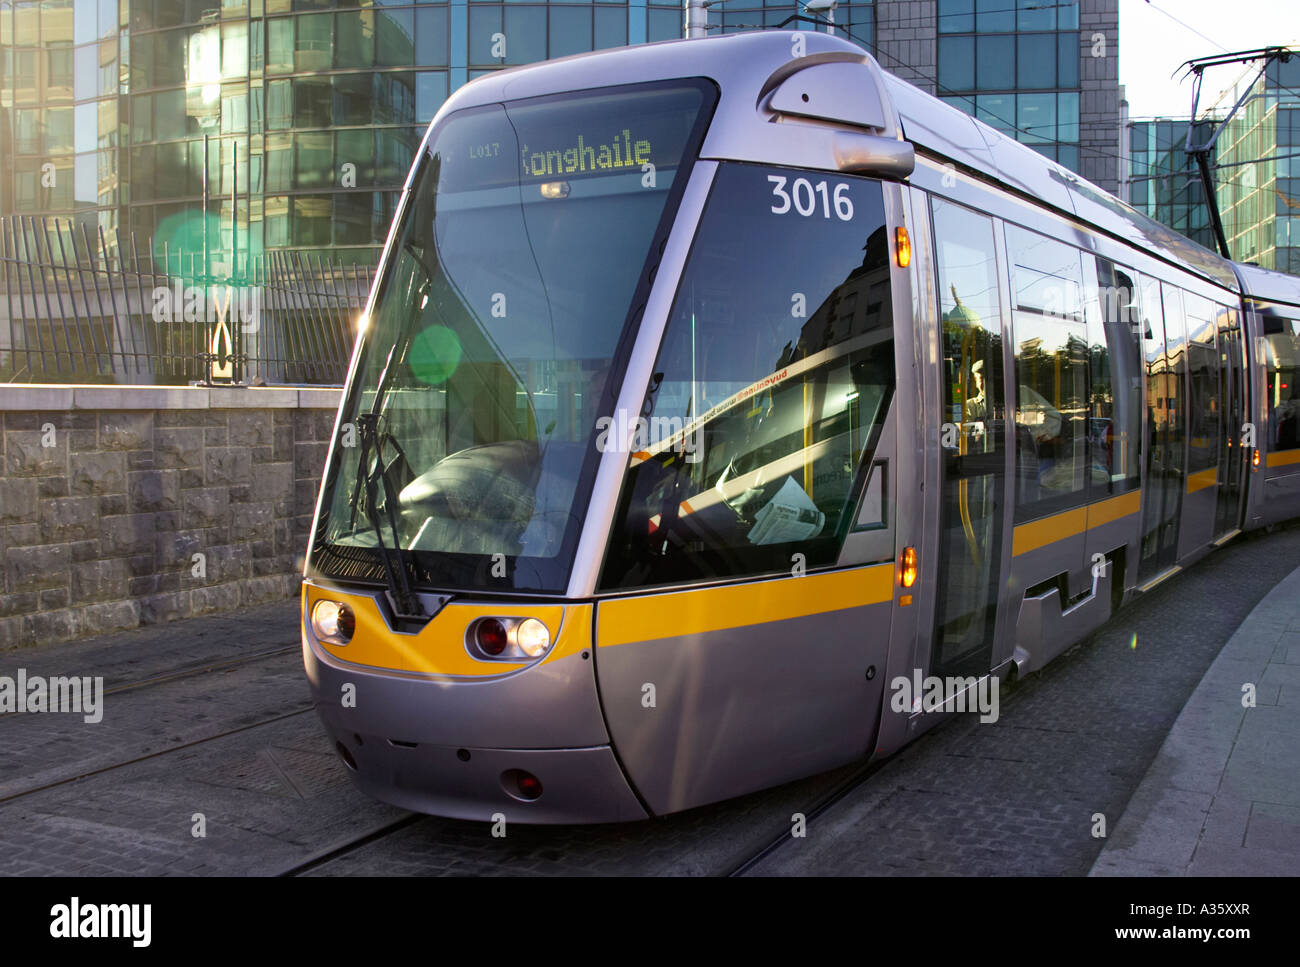 The LUAS dublins new tram system travelling into Connolly station from Tallaght on the red route connolly station Stock Photo